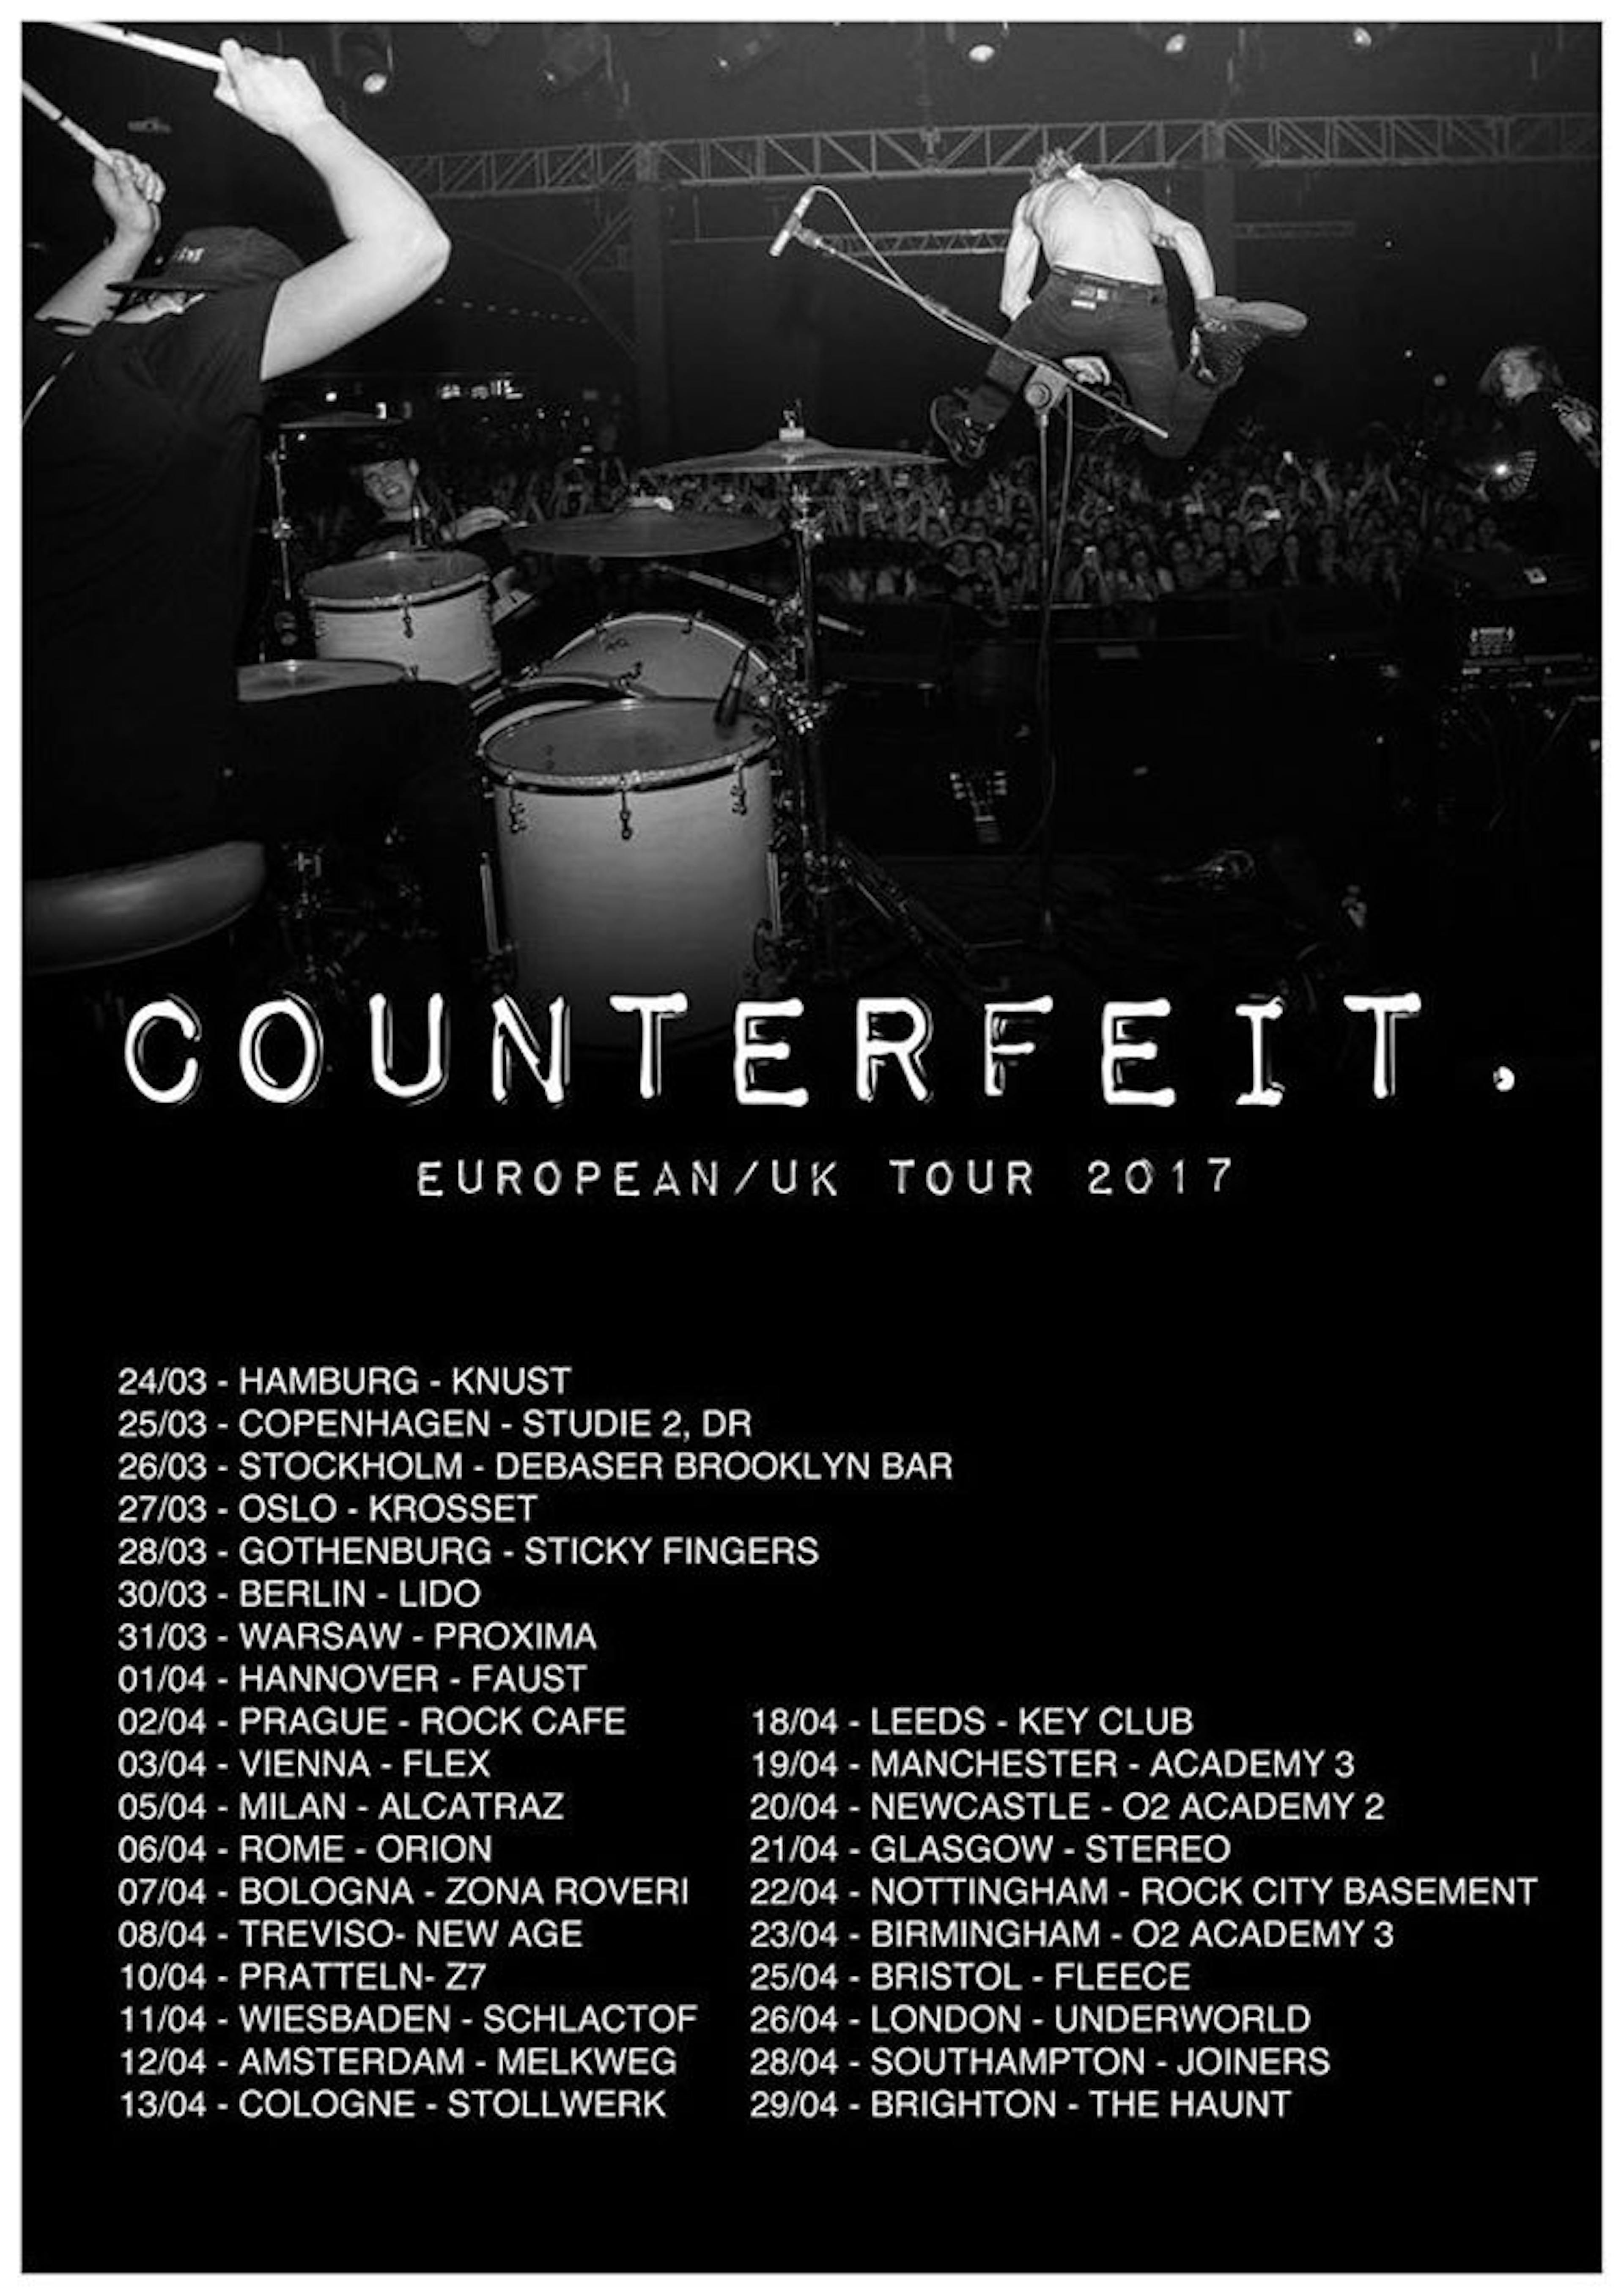 Listen To The Debut Counterfeit Album, Together We Are Stronger